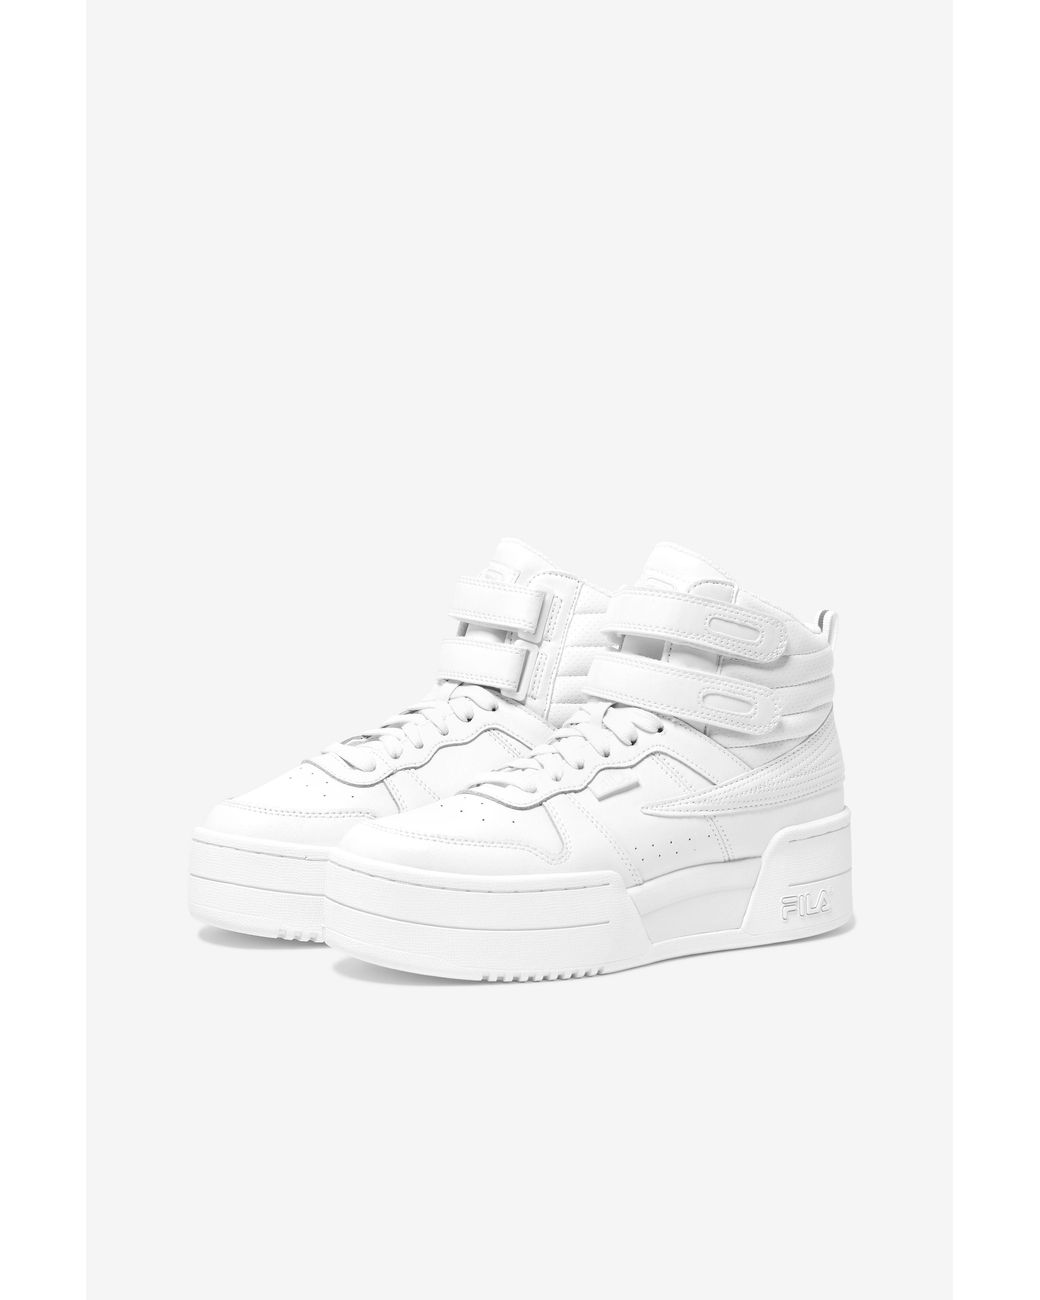 Fila F-14 Lifted in White | Lyst